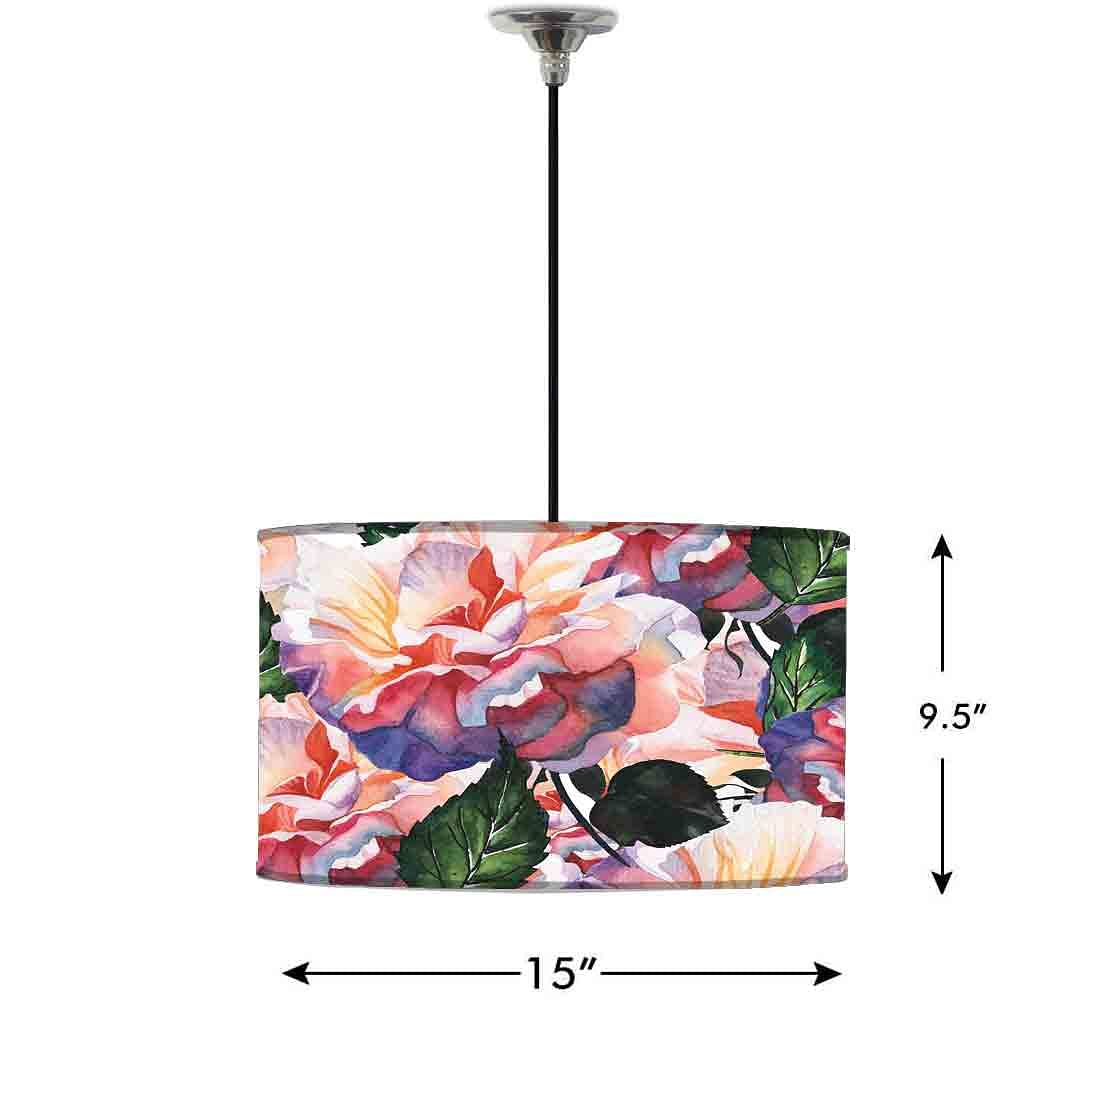 Ceiling Chandelier Lamps Drum Shade for Hall - 0022 Nutcase